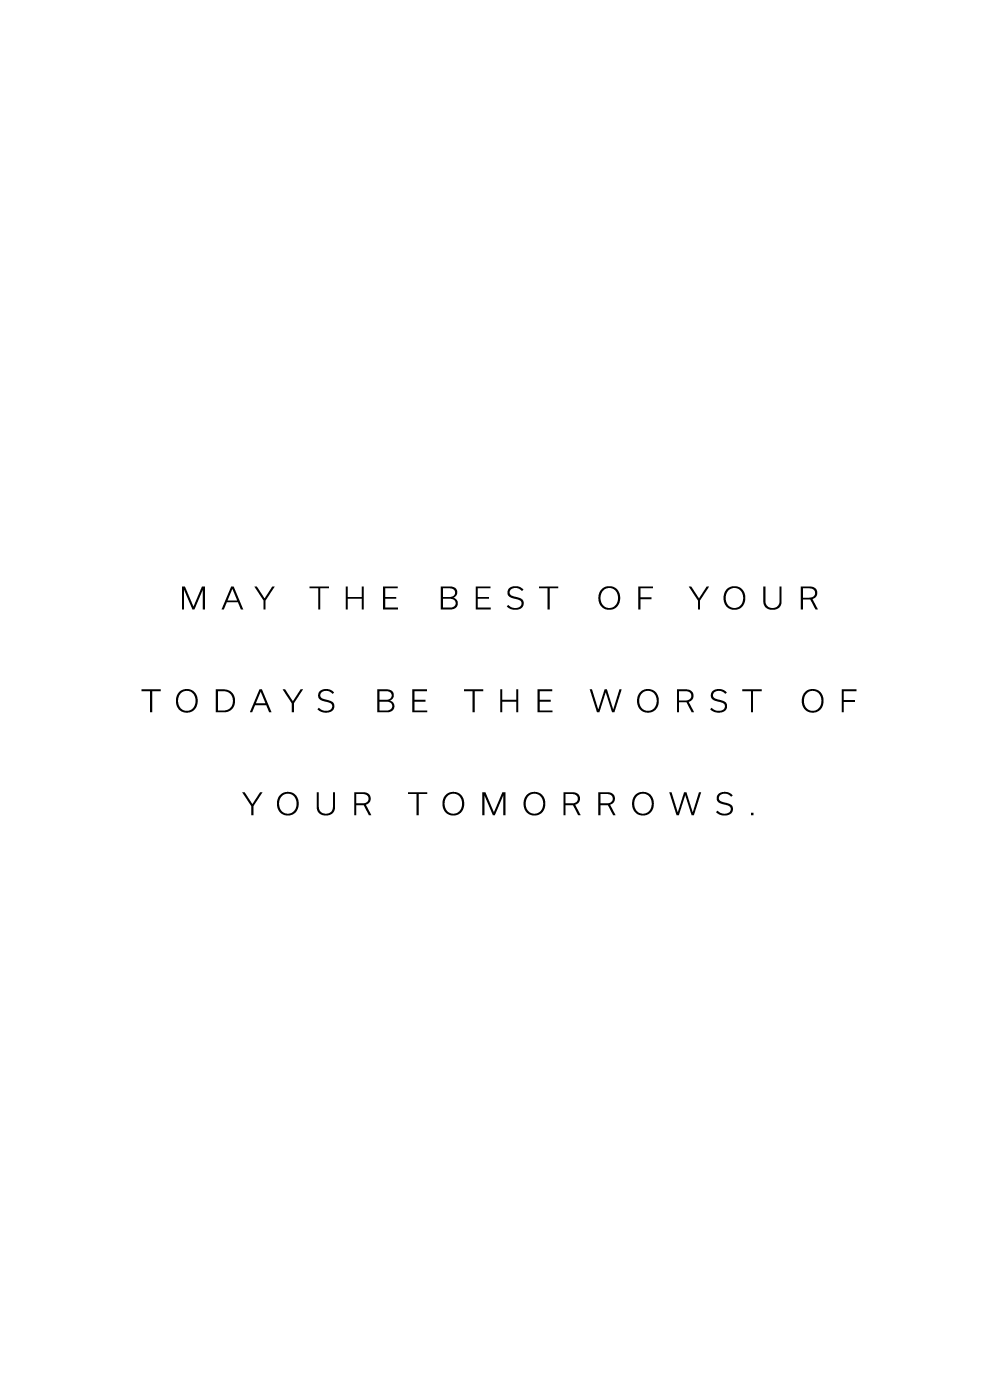 "May the best of your todays be the best of your tomorrows" citatplakat